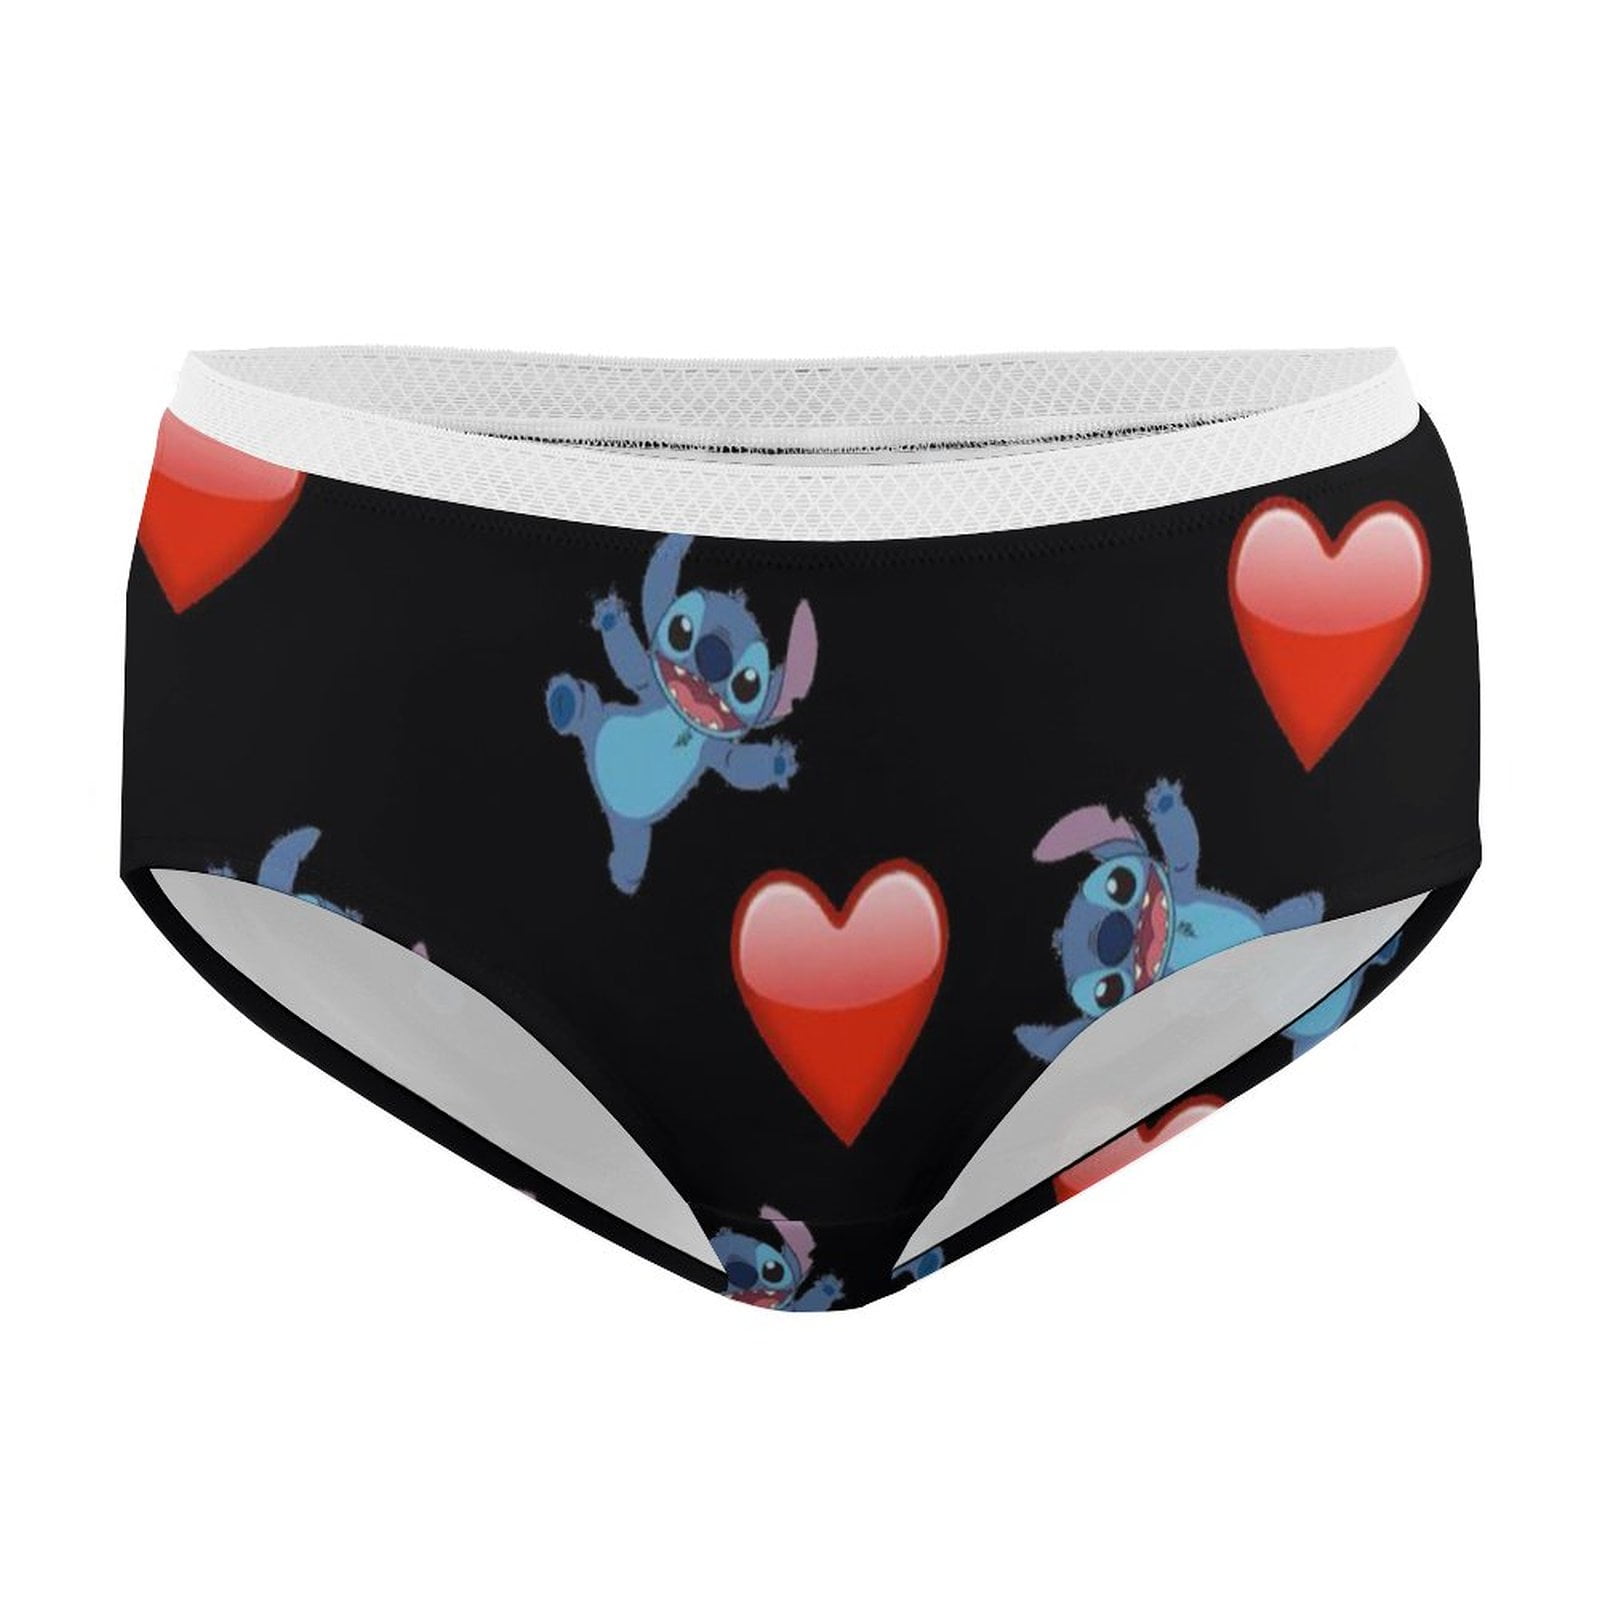 Lilo & Stitch Women's Hipster Panties, 3 Pack